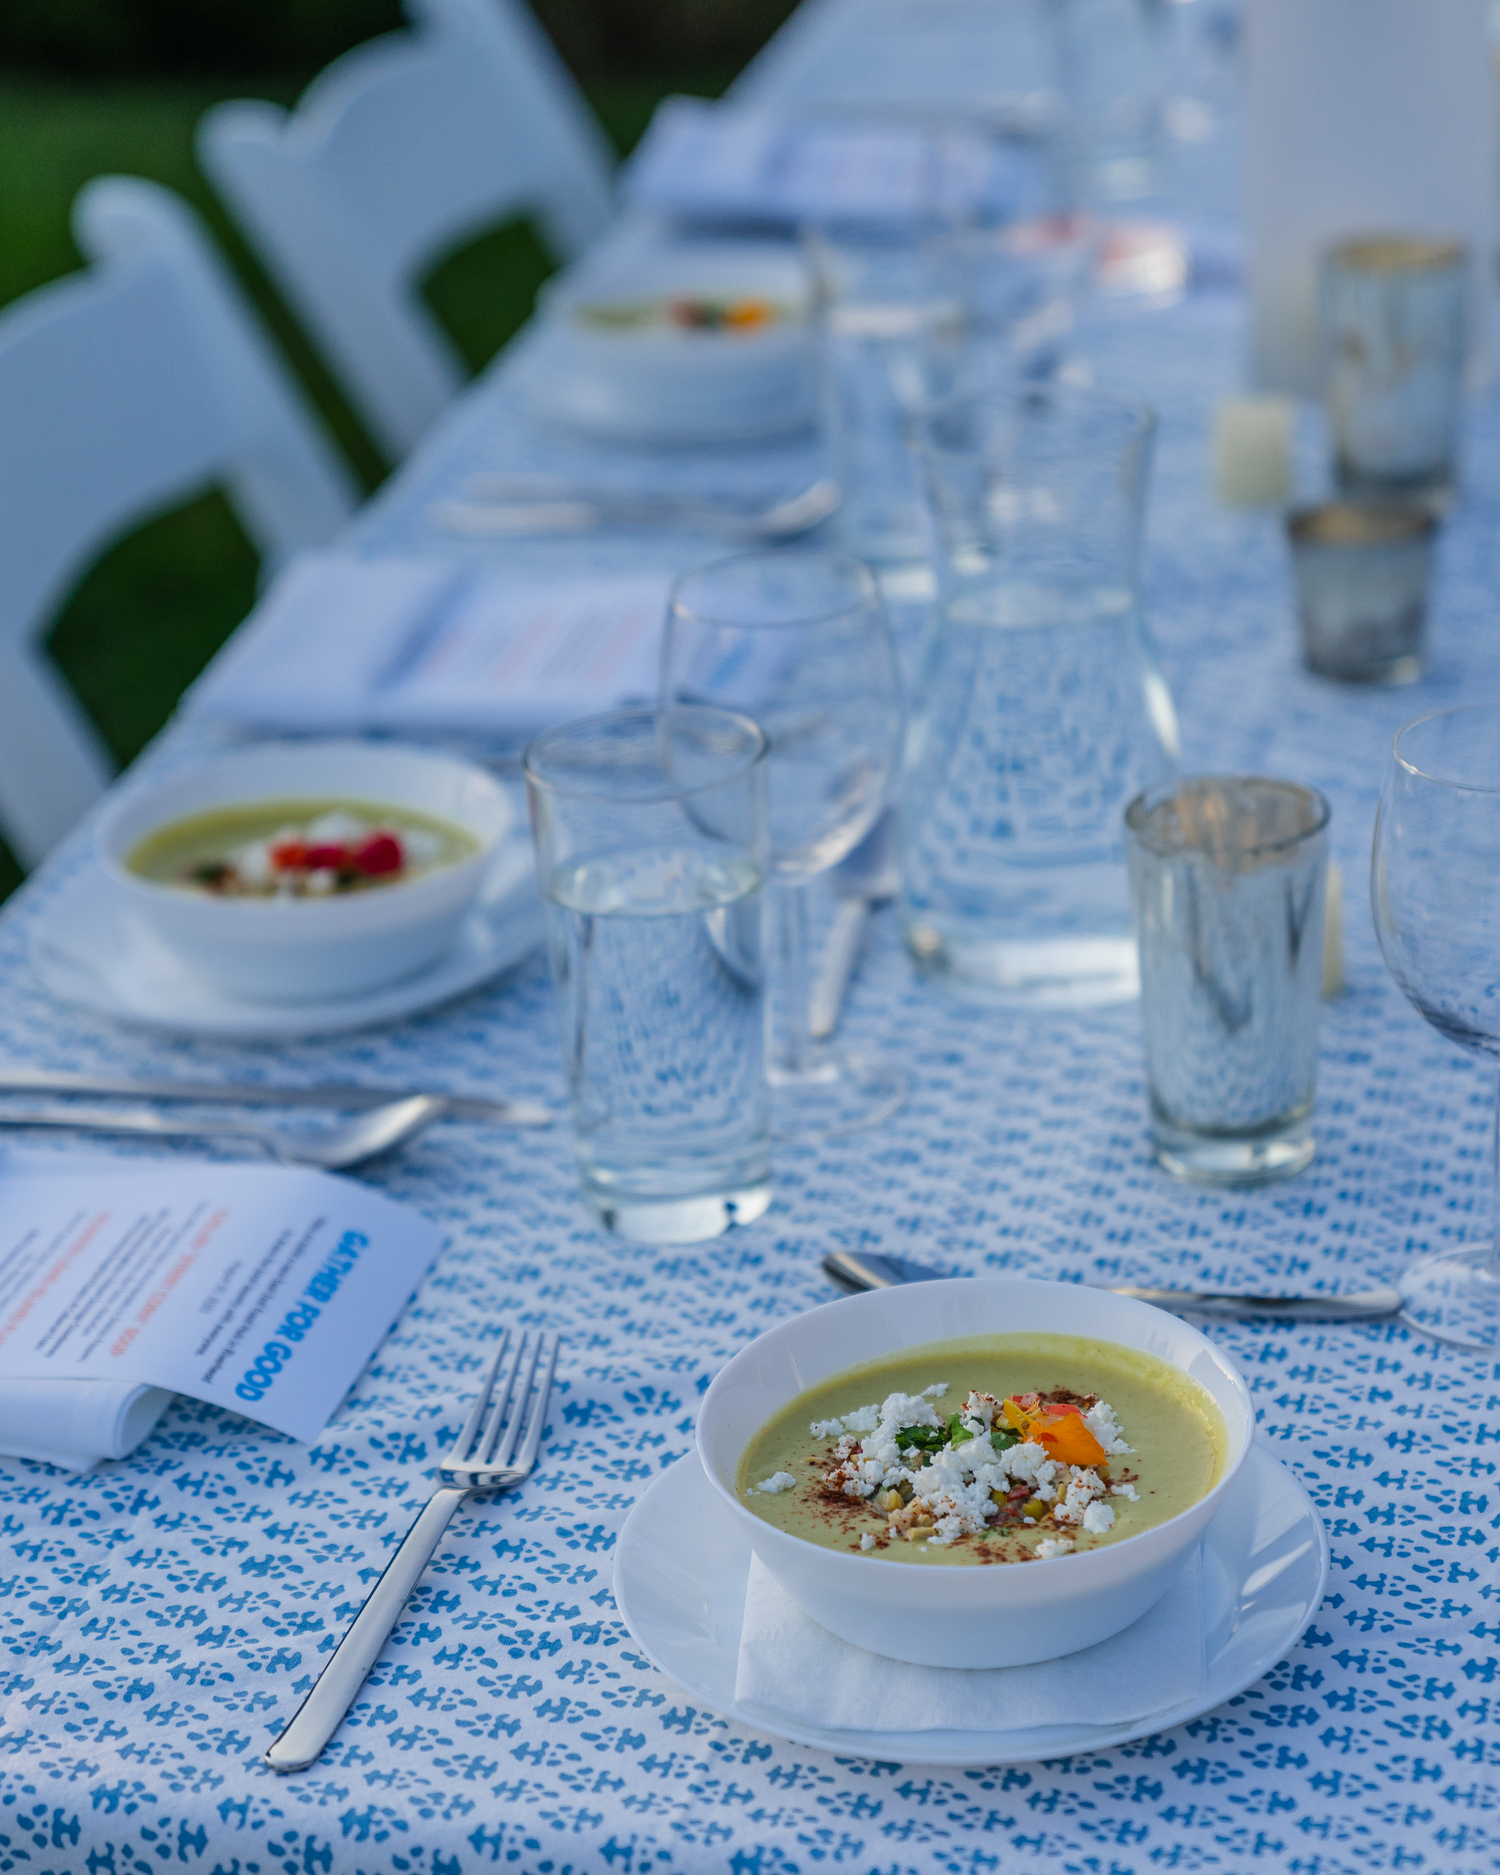 Chilled “Street Corn” Soup featuring Balsam Farms, Crowley’s Farmstand, The Hoppy Acre and Goodale Farms. CORINNE TOUSEY